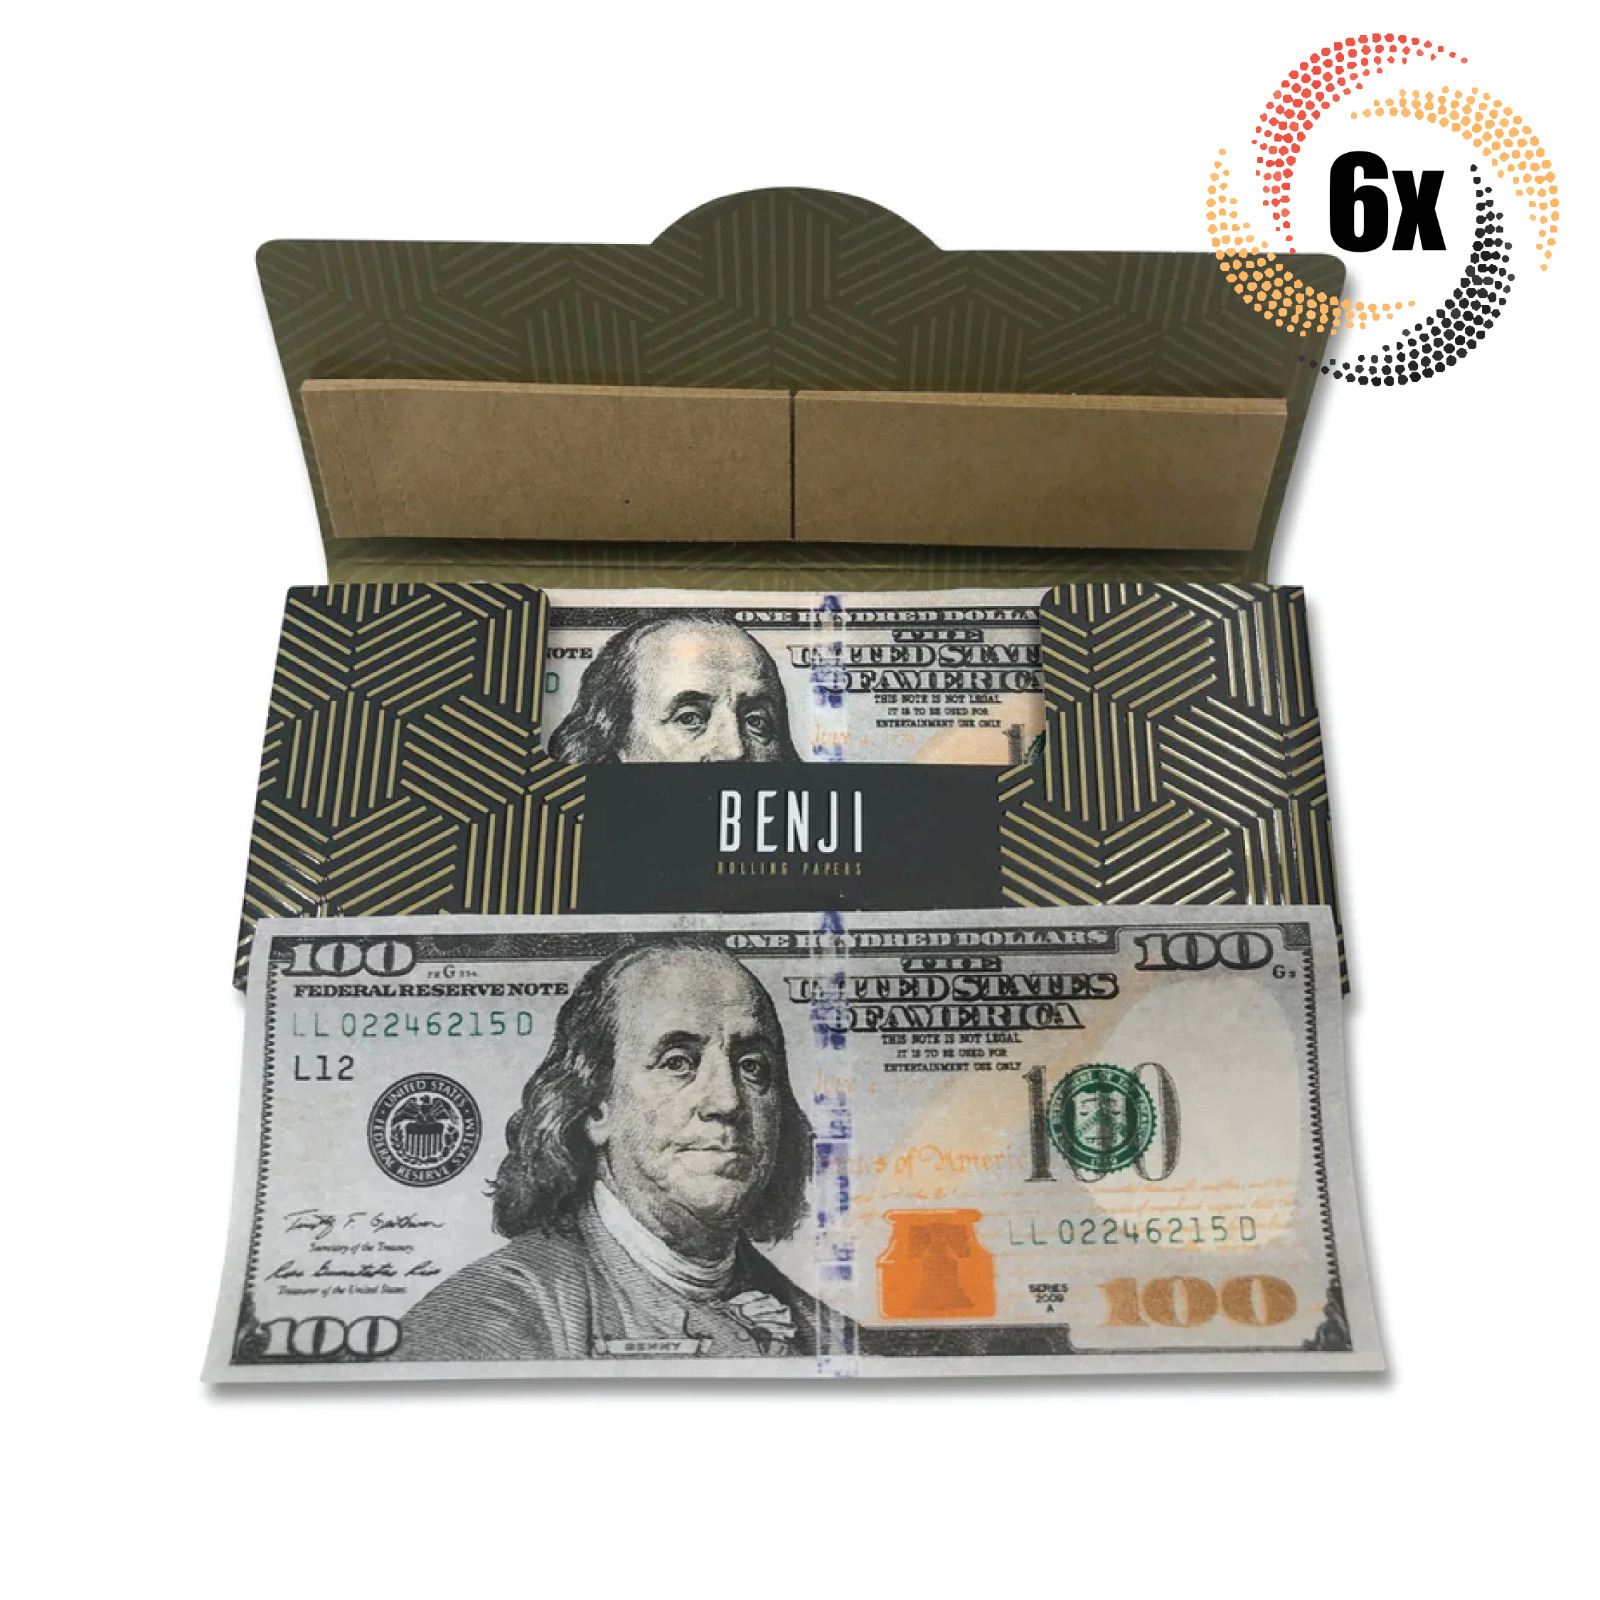 6x Packs Benji $100 Money King Rolling Papers & Filters | 20CT | 2 Free Tubes